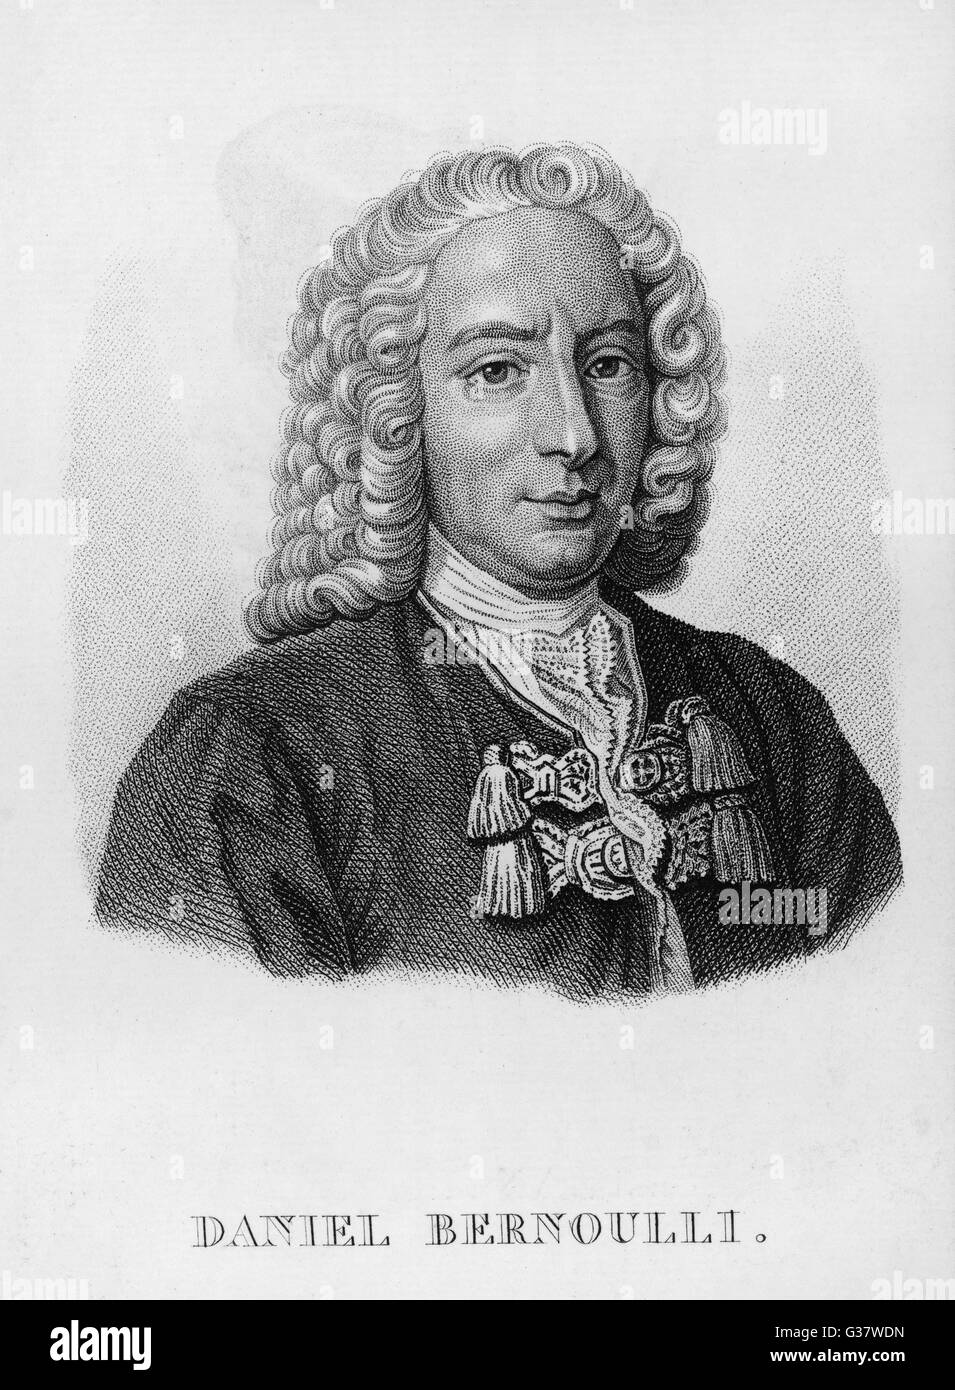 DANIEL BERNOUILLI Swiss Professor of mathematics  at St Petersburg and of  anatomy, botany and physics  and then of philosophy at the  University of Basel     Date: 1700 - 1783 Stock Photo